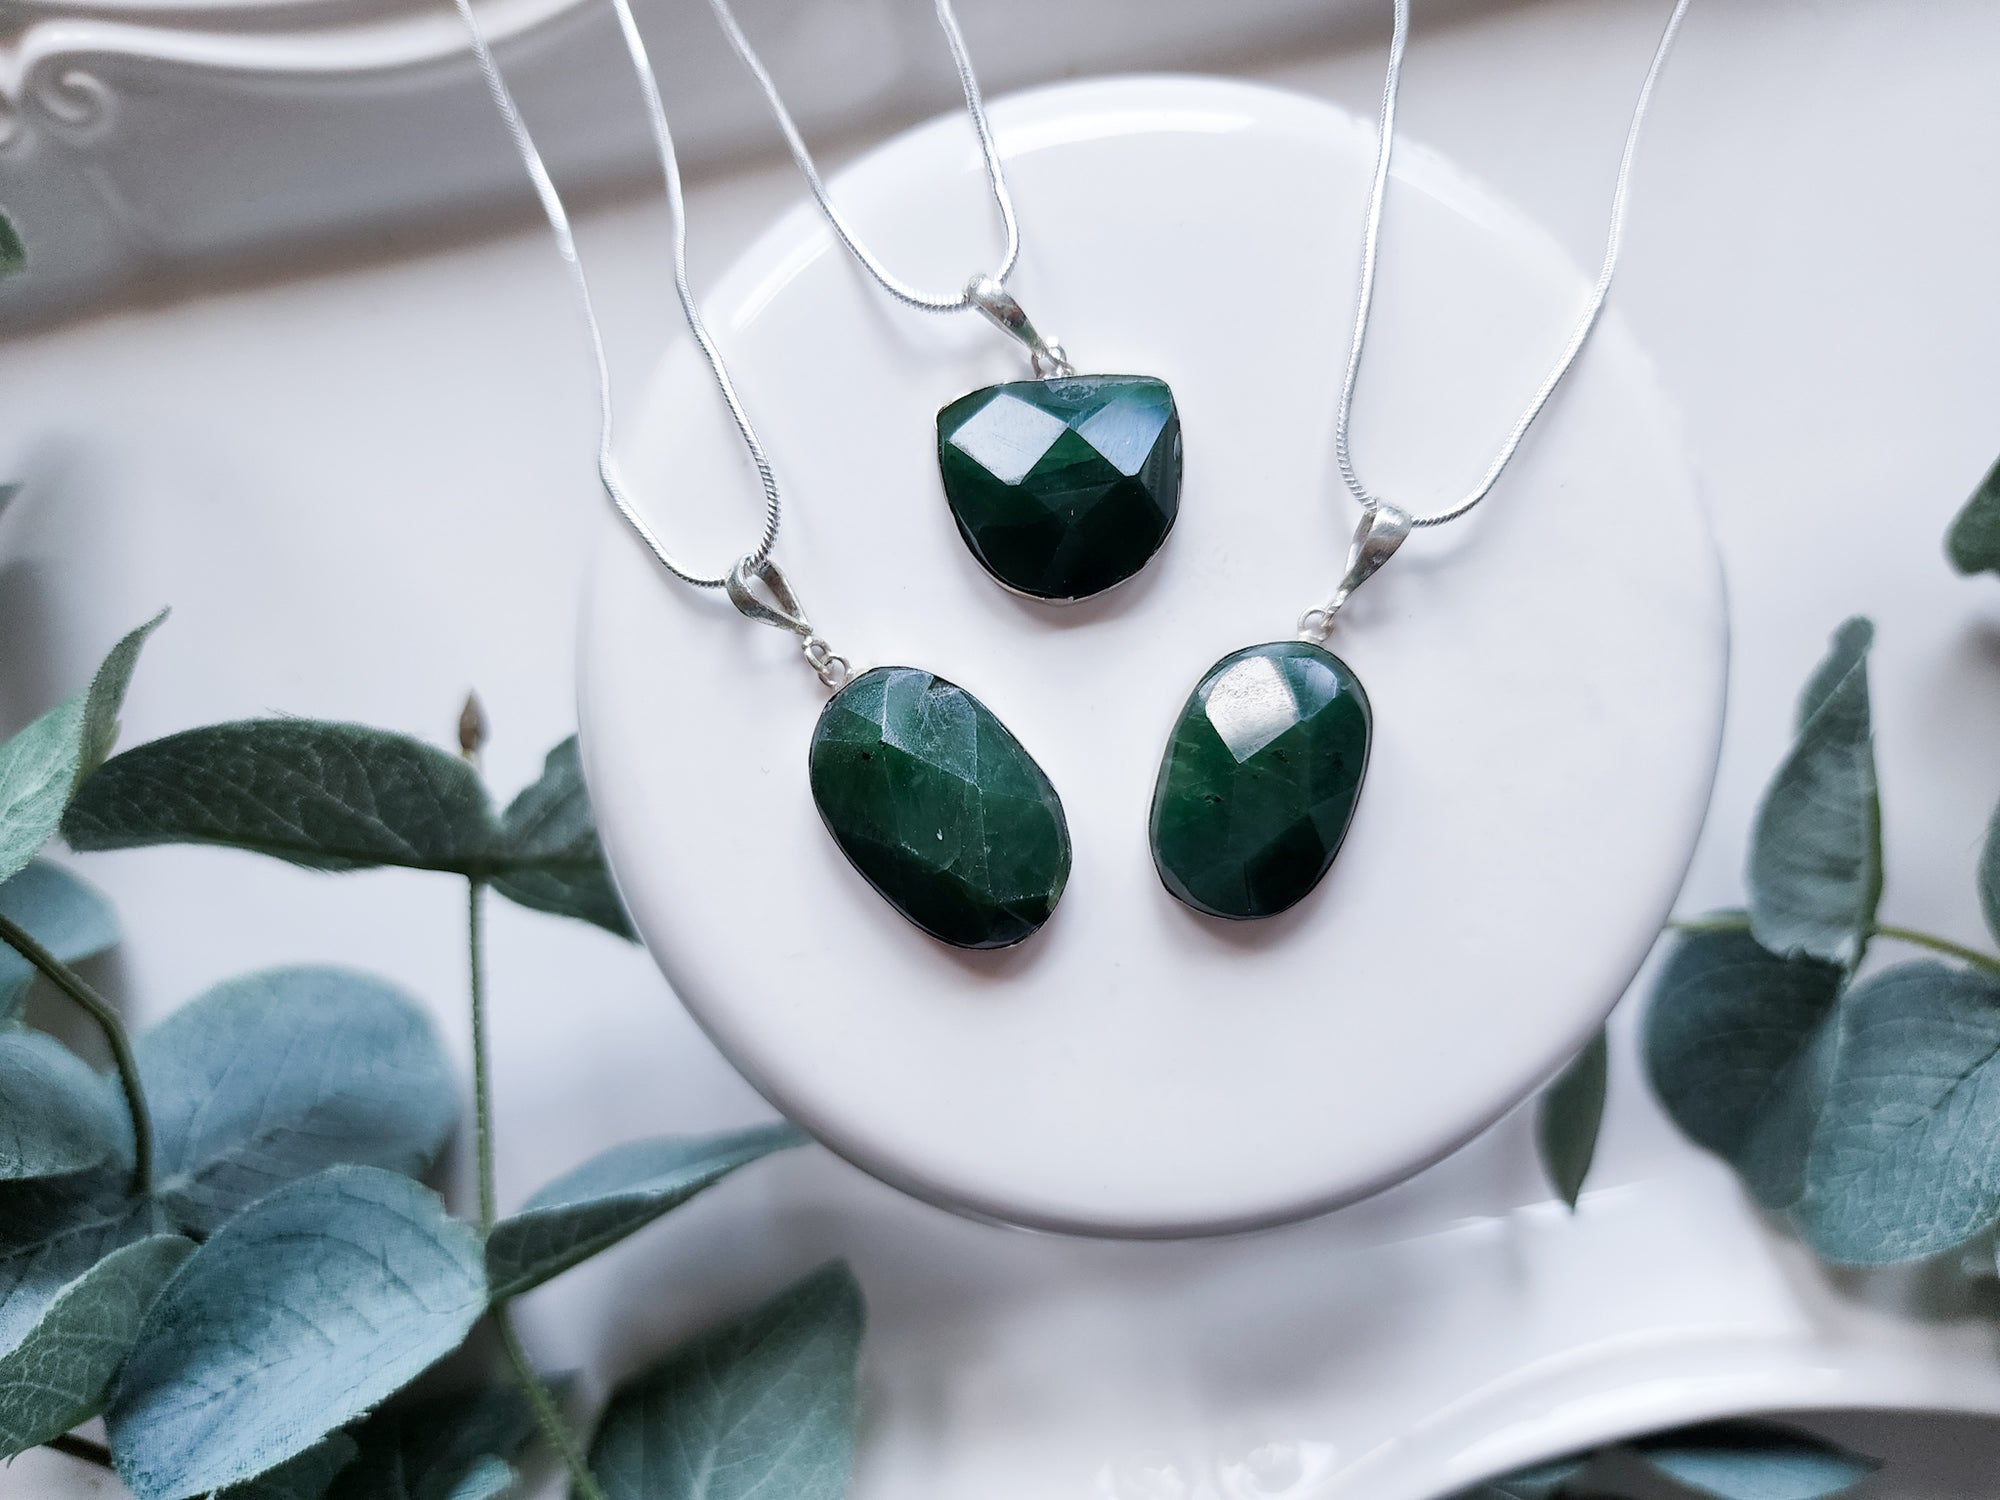 Nephrite Jade Faceted Sterling Pendant Necklace